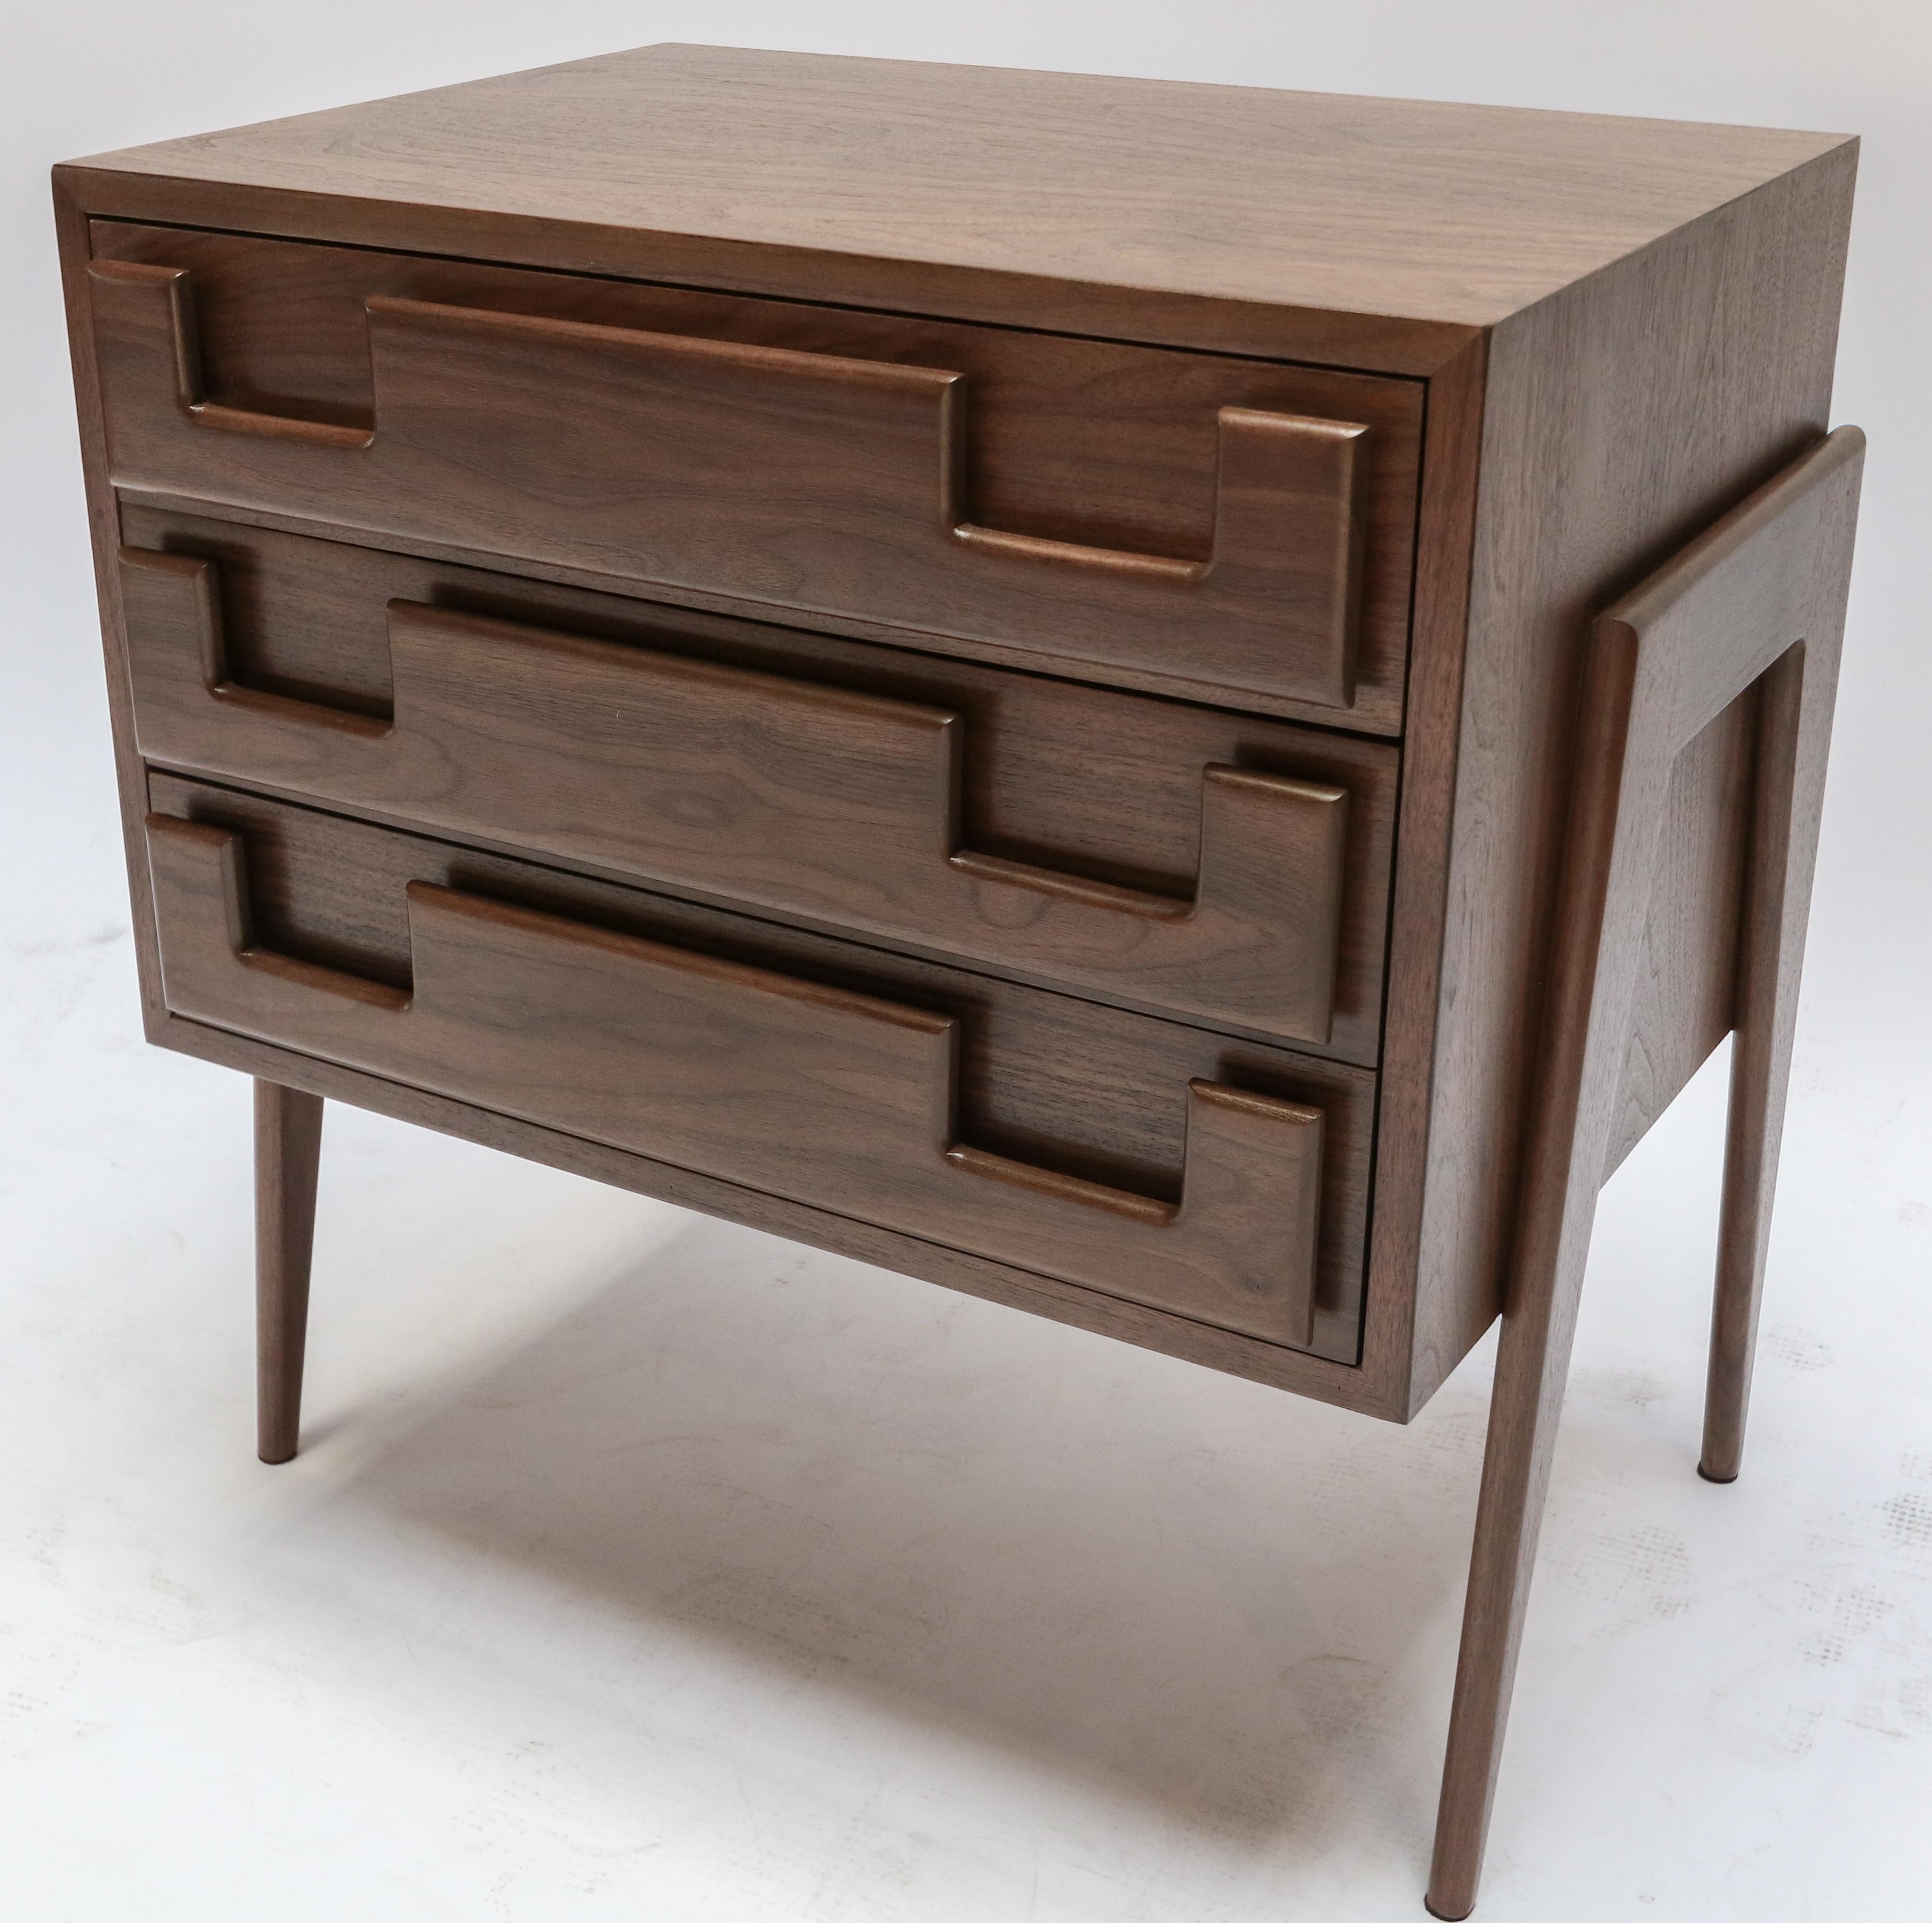 Custom midcentury style nightstands made in American walnut with three drawers.  Made in Los Angeles by Adesso Imports. 

Can be done in different sizes and wood.